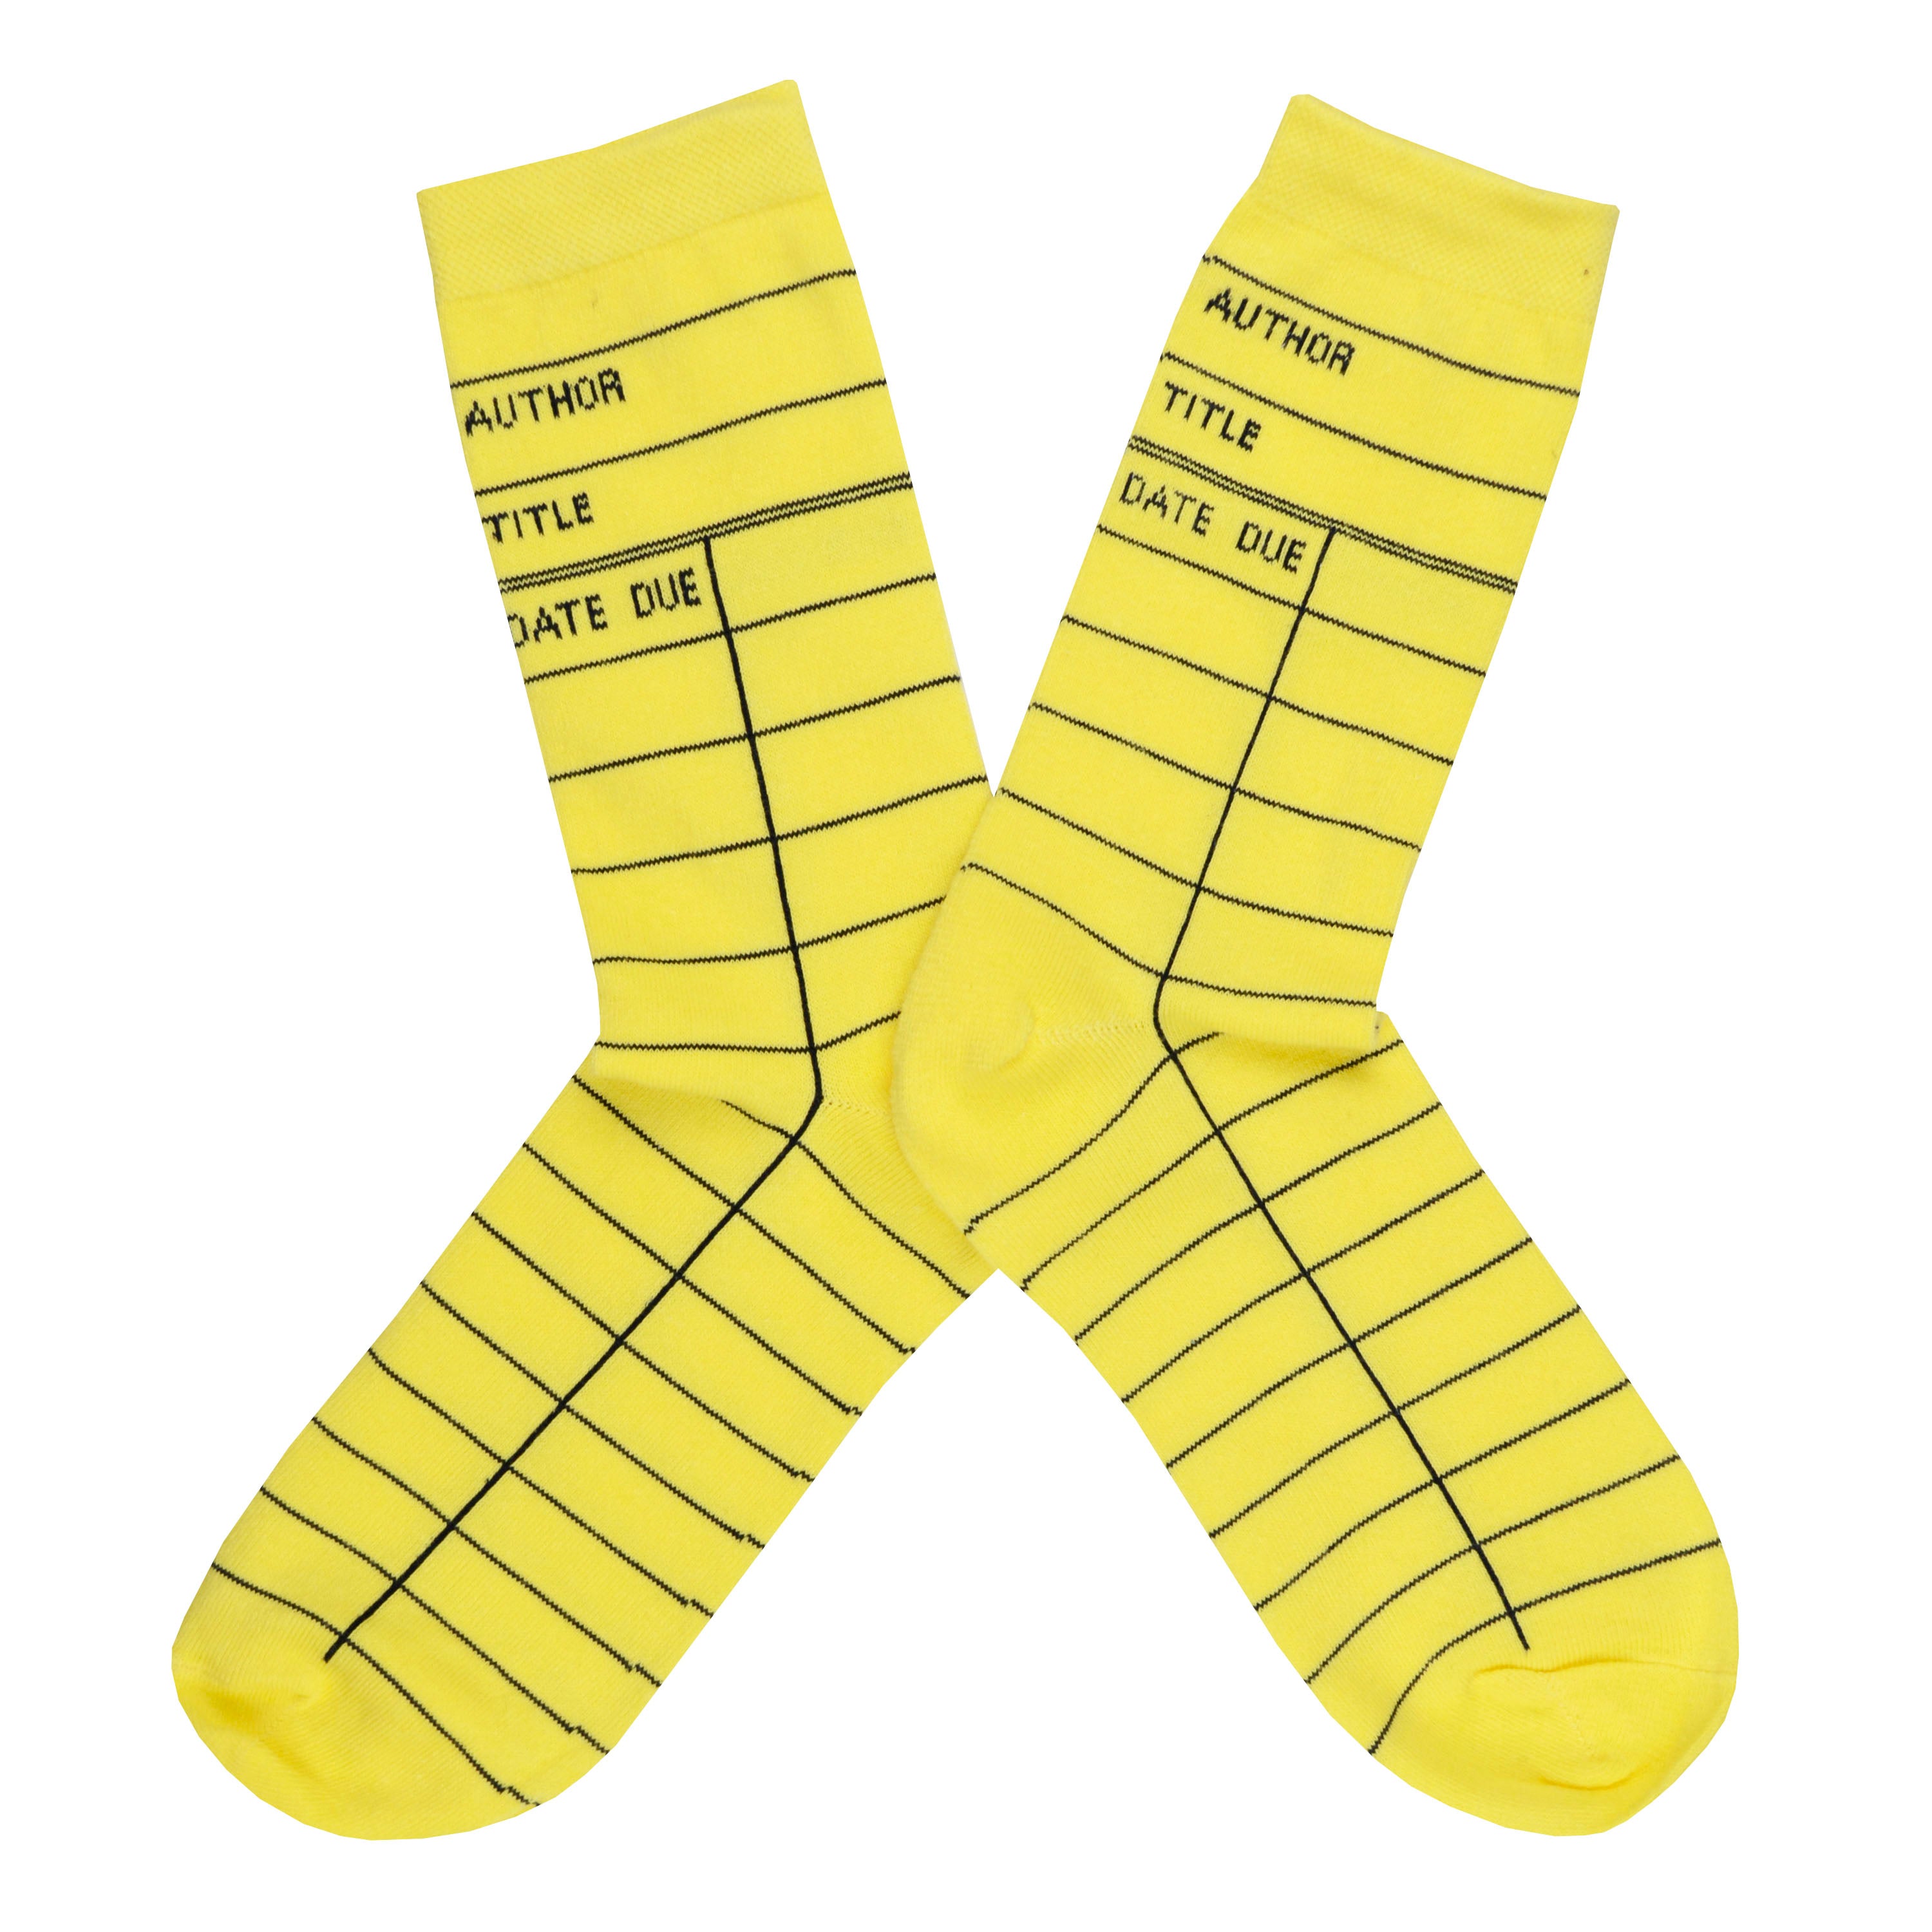 These yellow cotton unisex crew socks by the brand Out of Print feature the iconic library card design with the words 